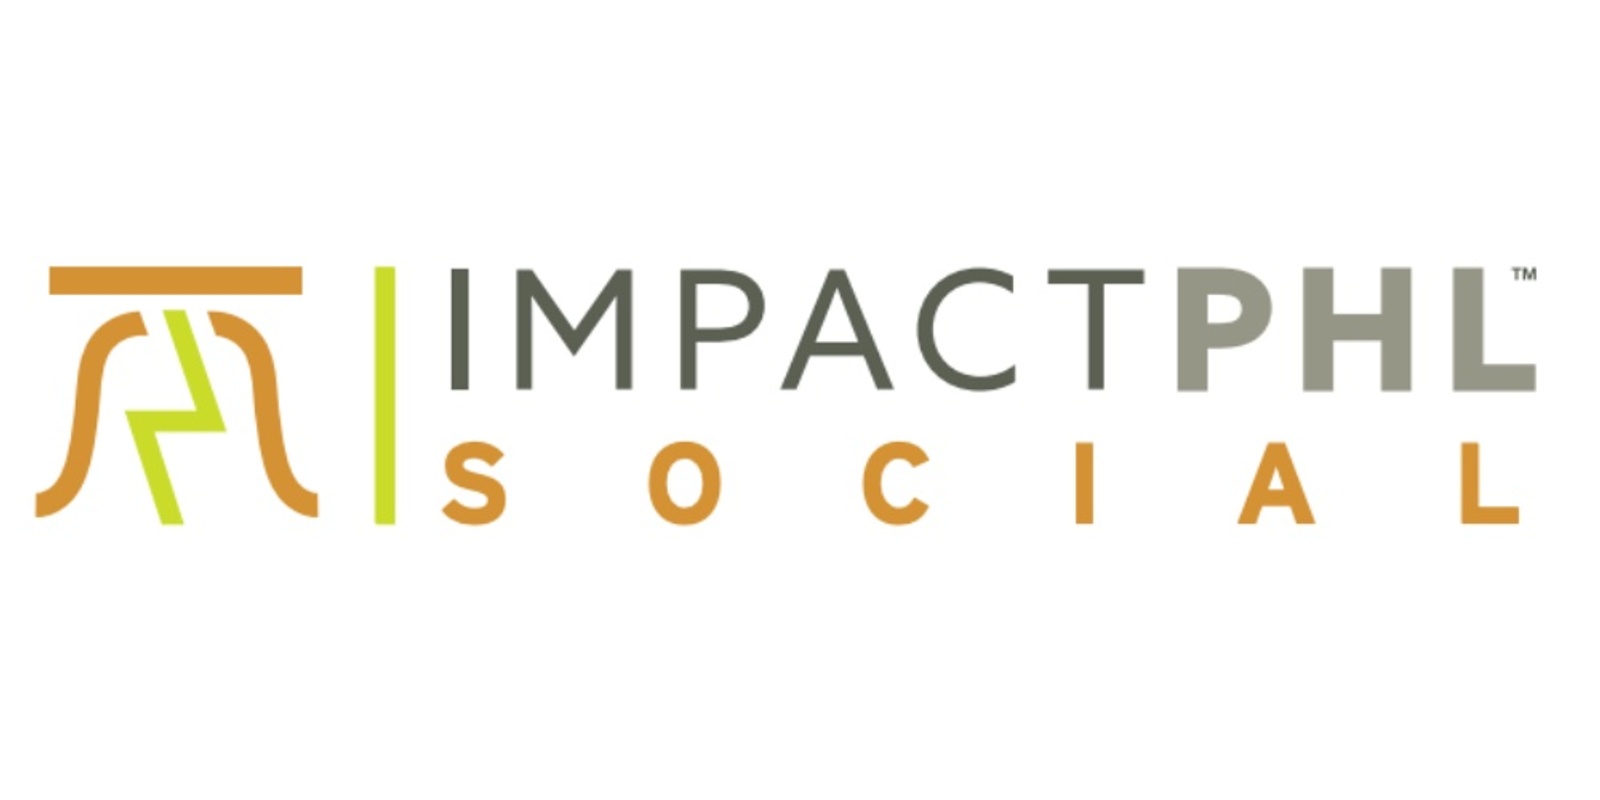 Banner image for ImpactPHL Social at the Navy Yard